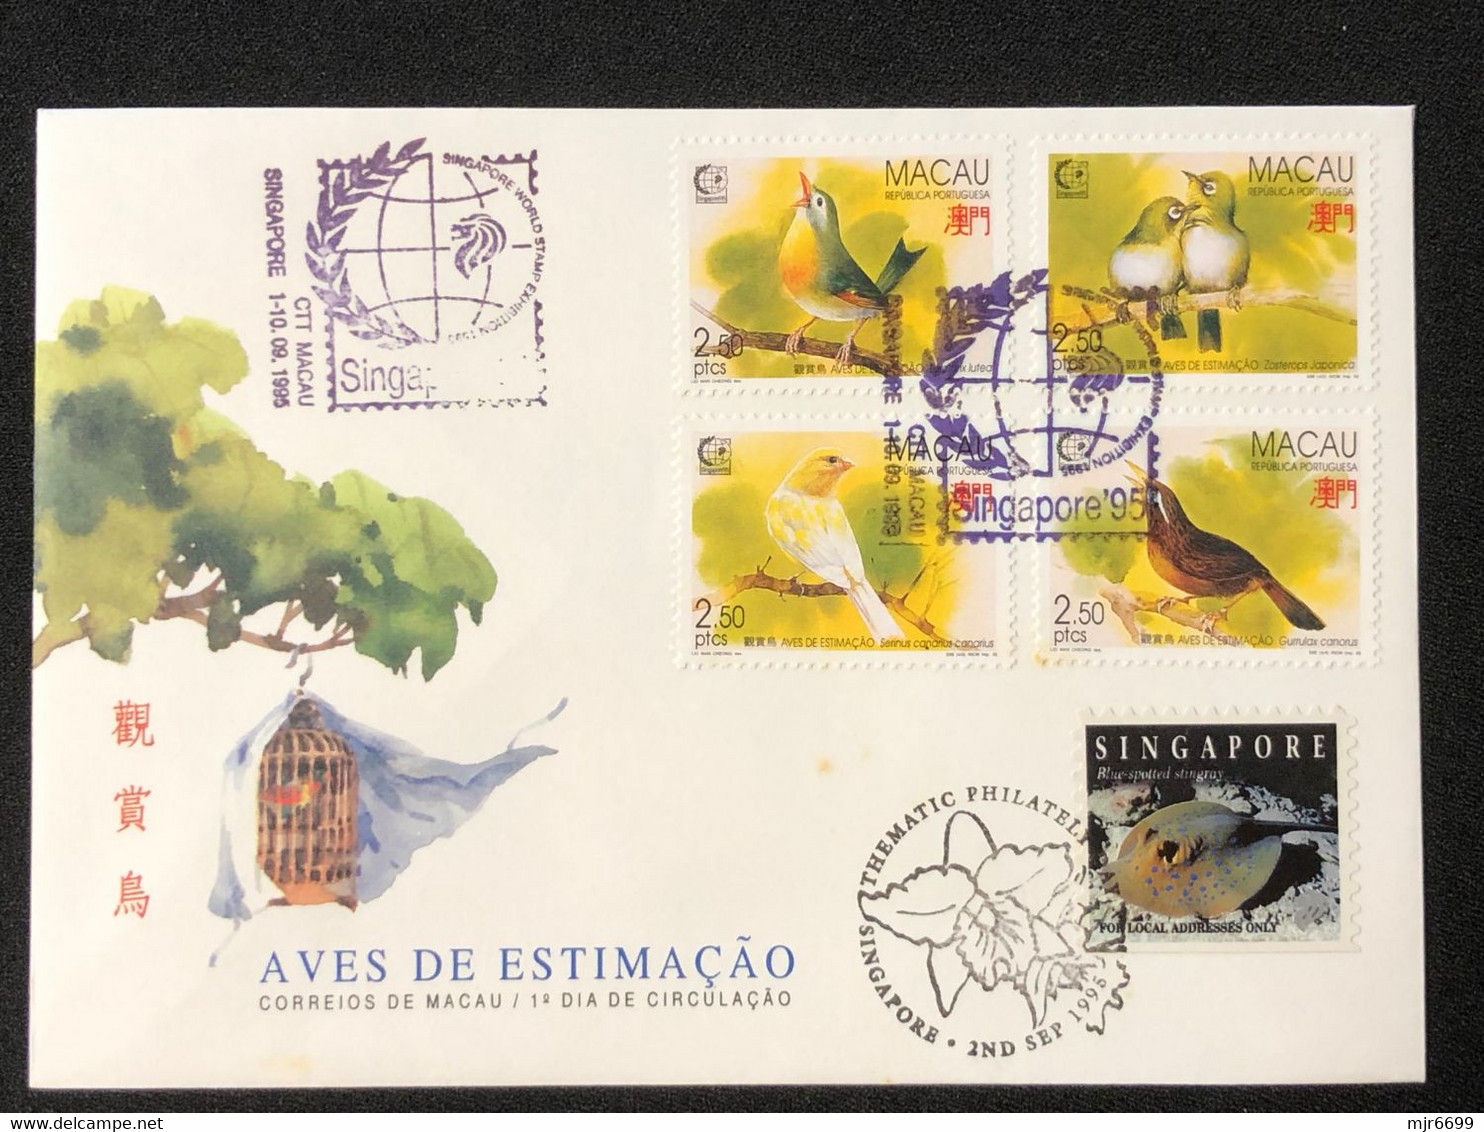 MACAU SINGAPORE WORLD STAMP EXPO 95 COMMEMORATIVE FIRST DAY COVER - Covers & Documents